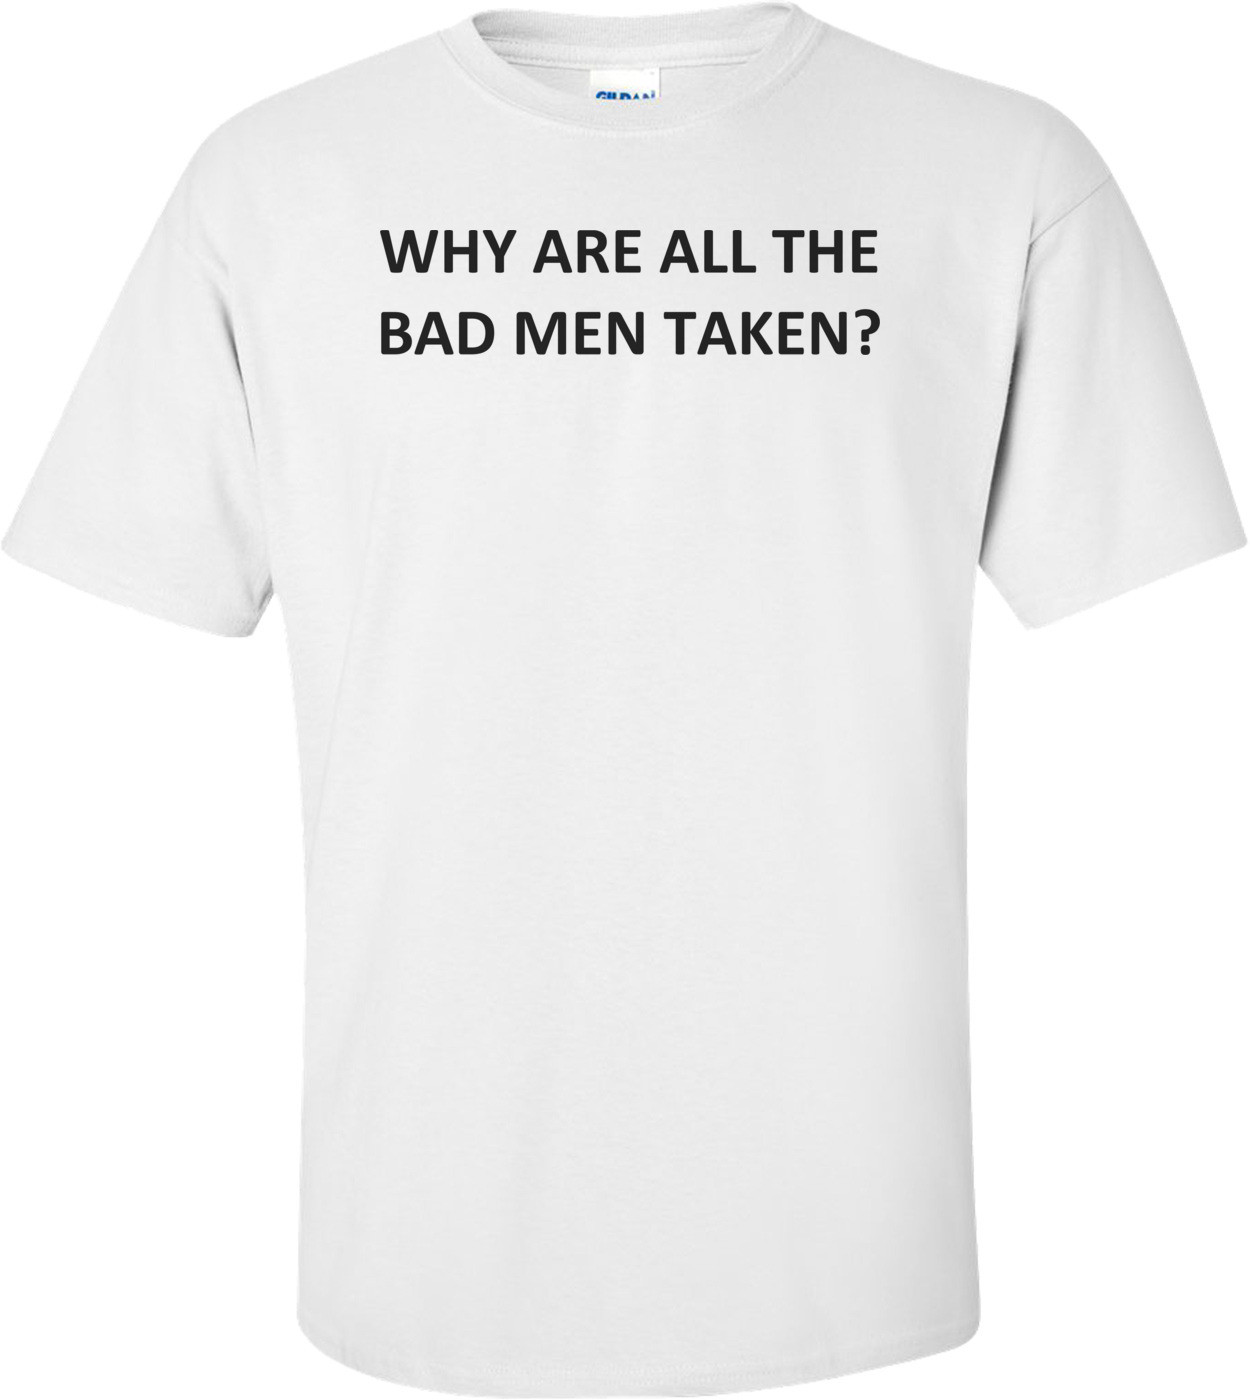 Why Are All The Bad Men Taken?